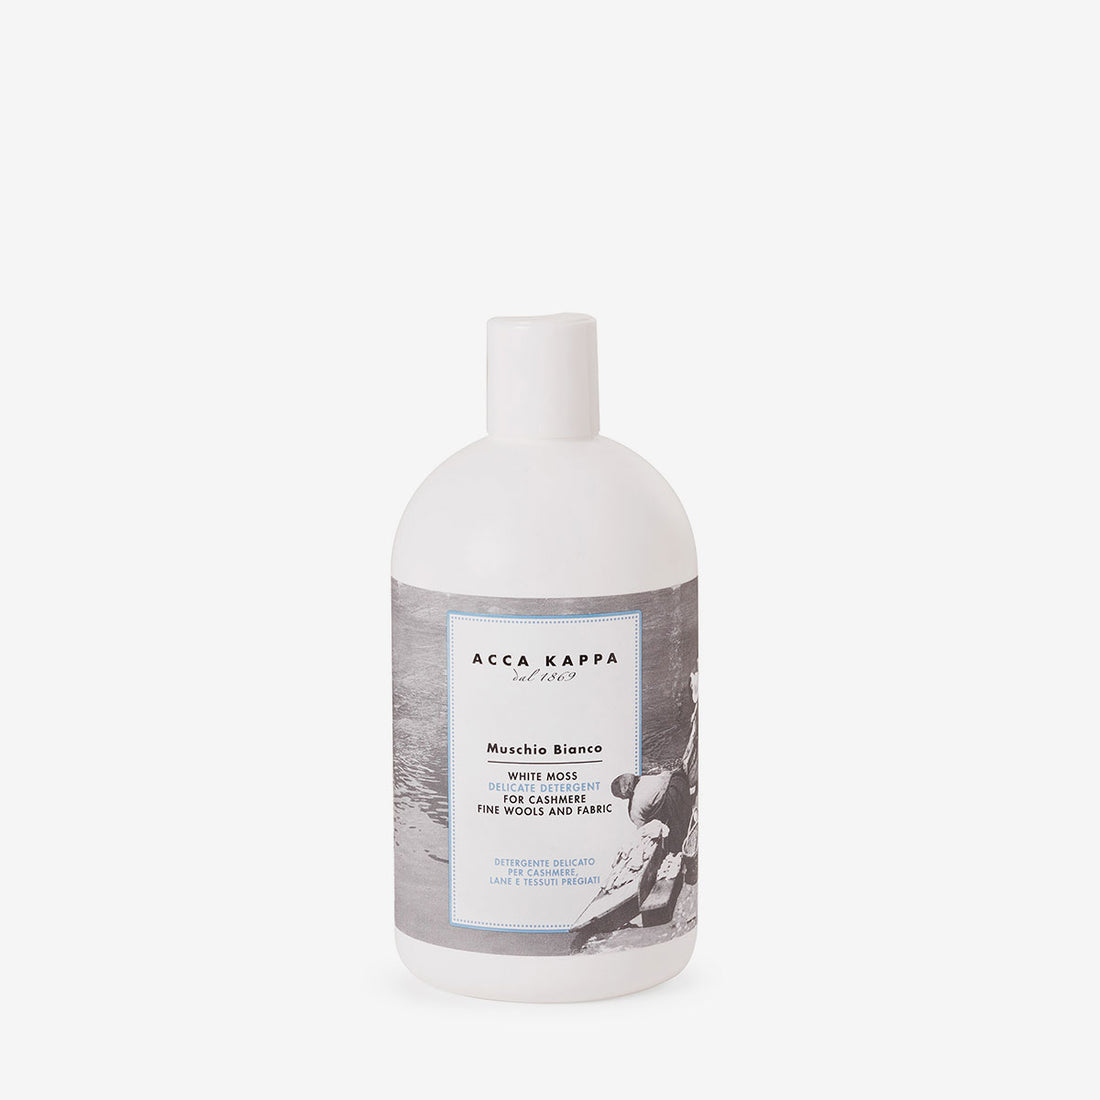 ACCA KAPPA White Moss Delicate Fabric Detergent 500ml